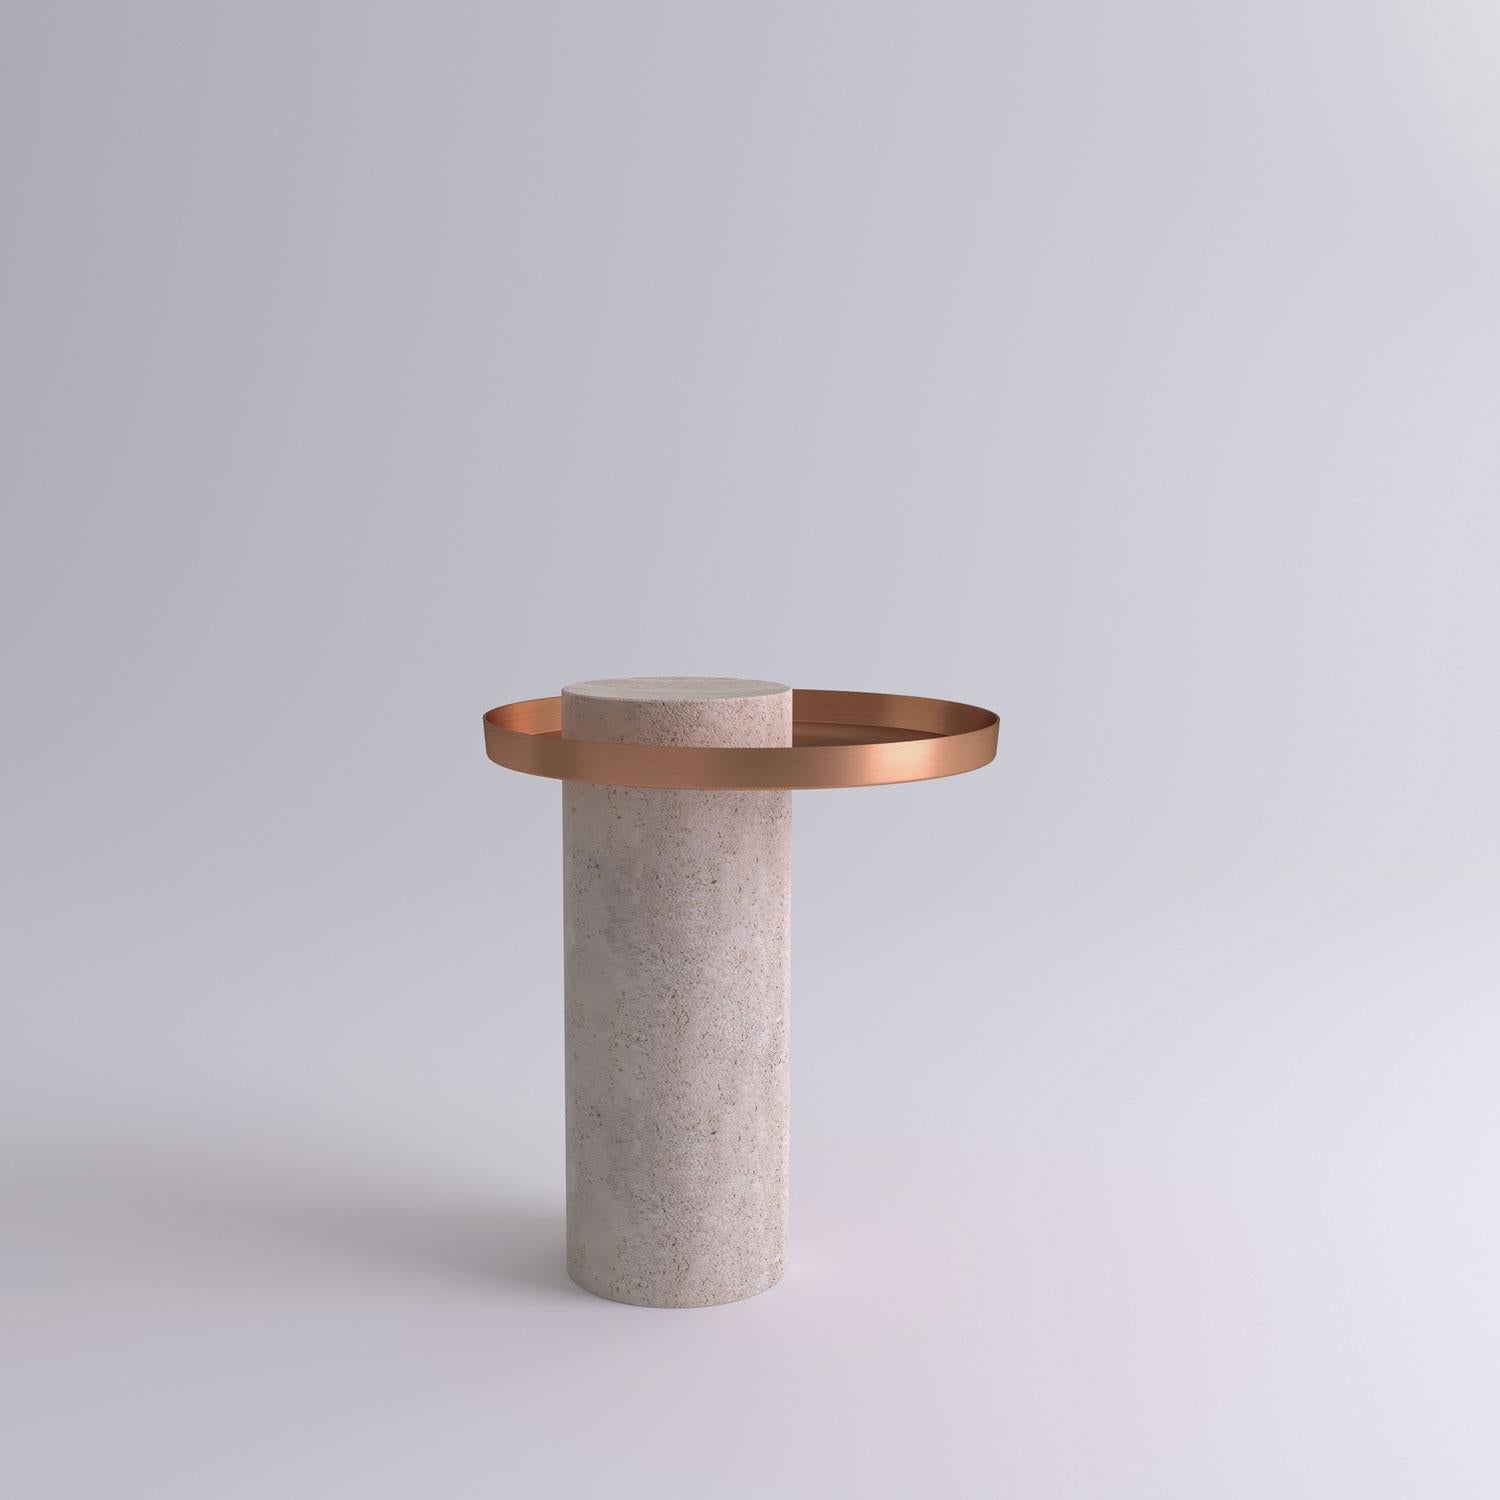 Medium travertine contemporary guéridon, Sebastian Herkner
Dimensions: D 40 x H 46 cm
Materials: Travertine stone, copper

The salute table exists in 3 sizes, 4 different marble stones for the column and 5 different finishes for the tray for a